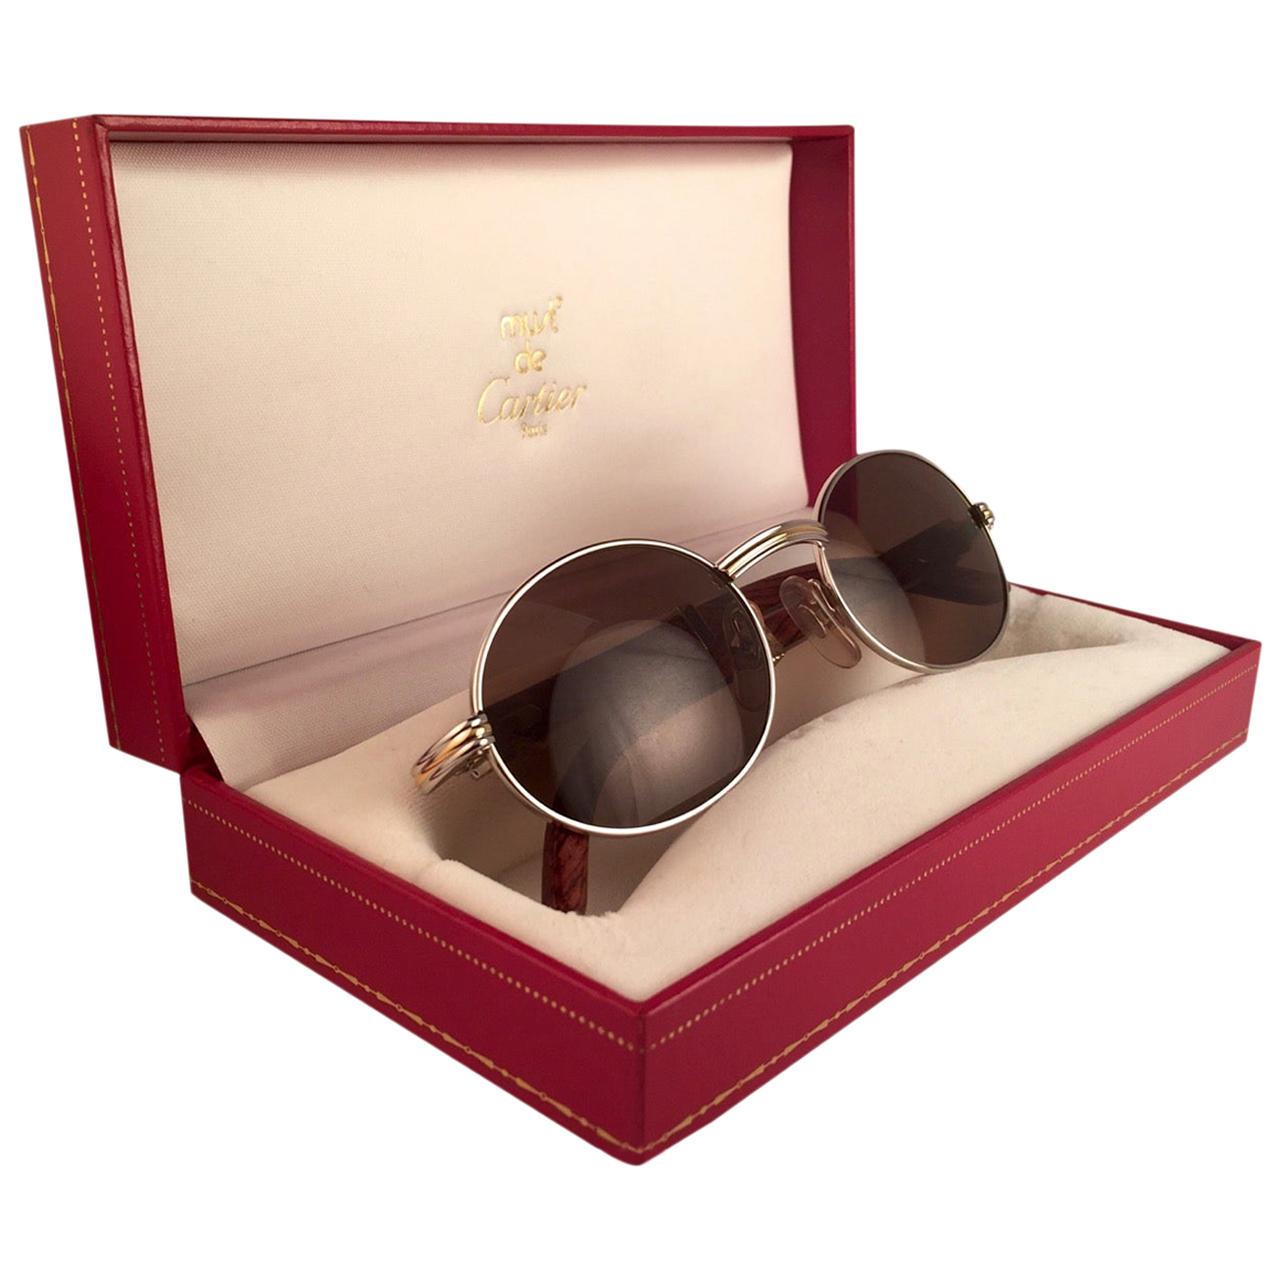 New Cartier Giverny Full Platine & Wood 51/20 Brown Lenses France Sunglasses